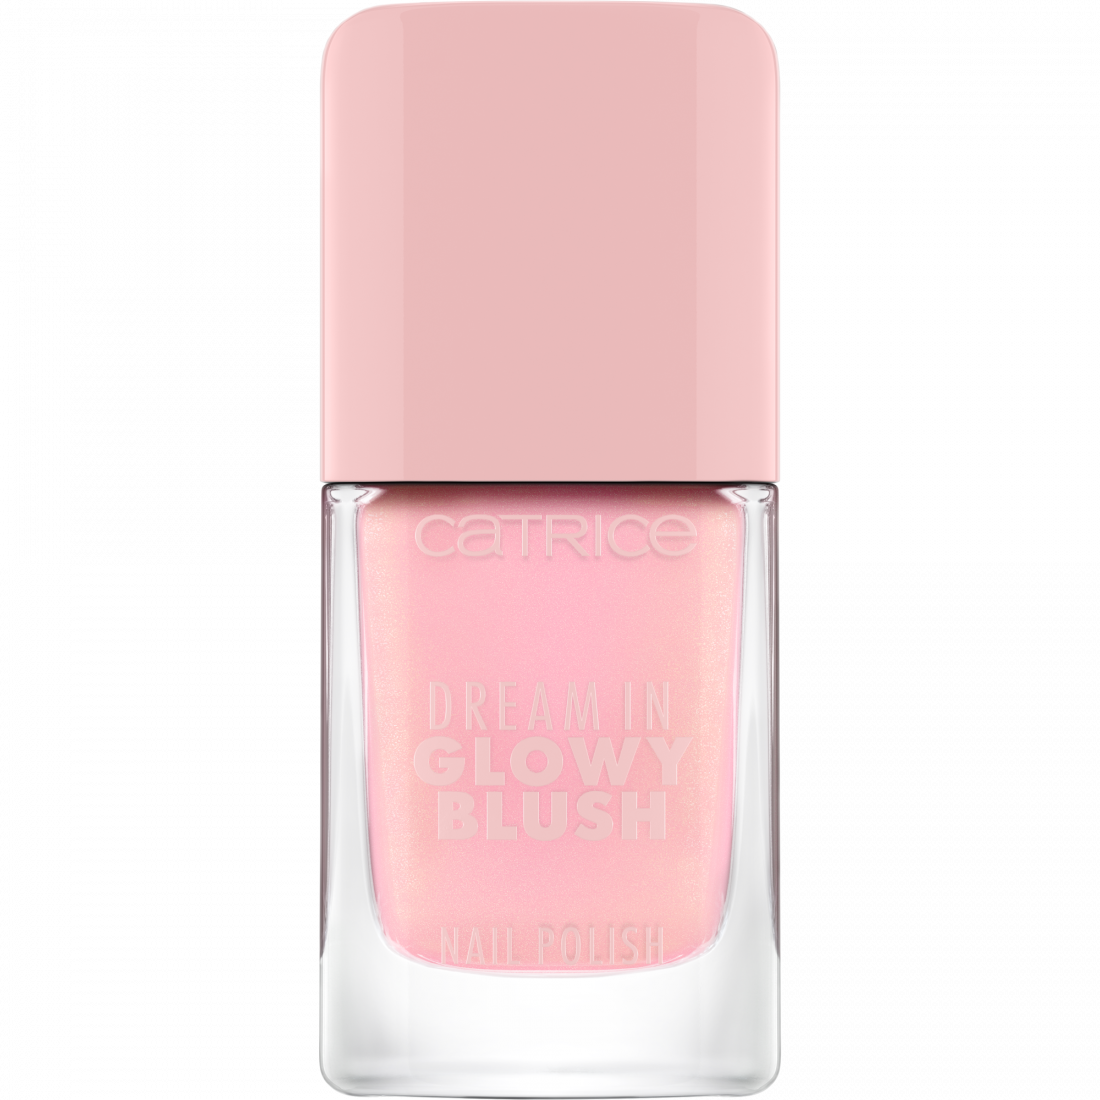 DREAM IN GLOW AND BLUSH Nagellack 080-Rose Side Of Life 10,5 ml